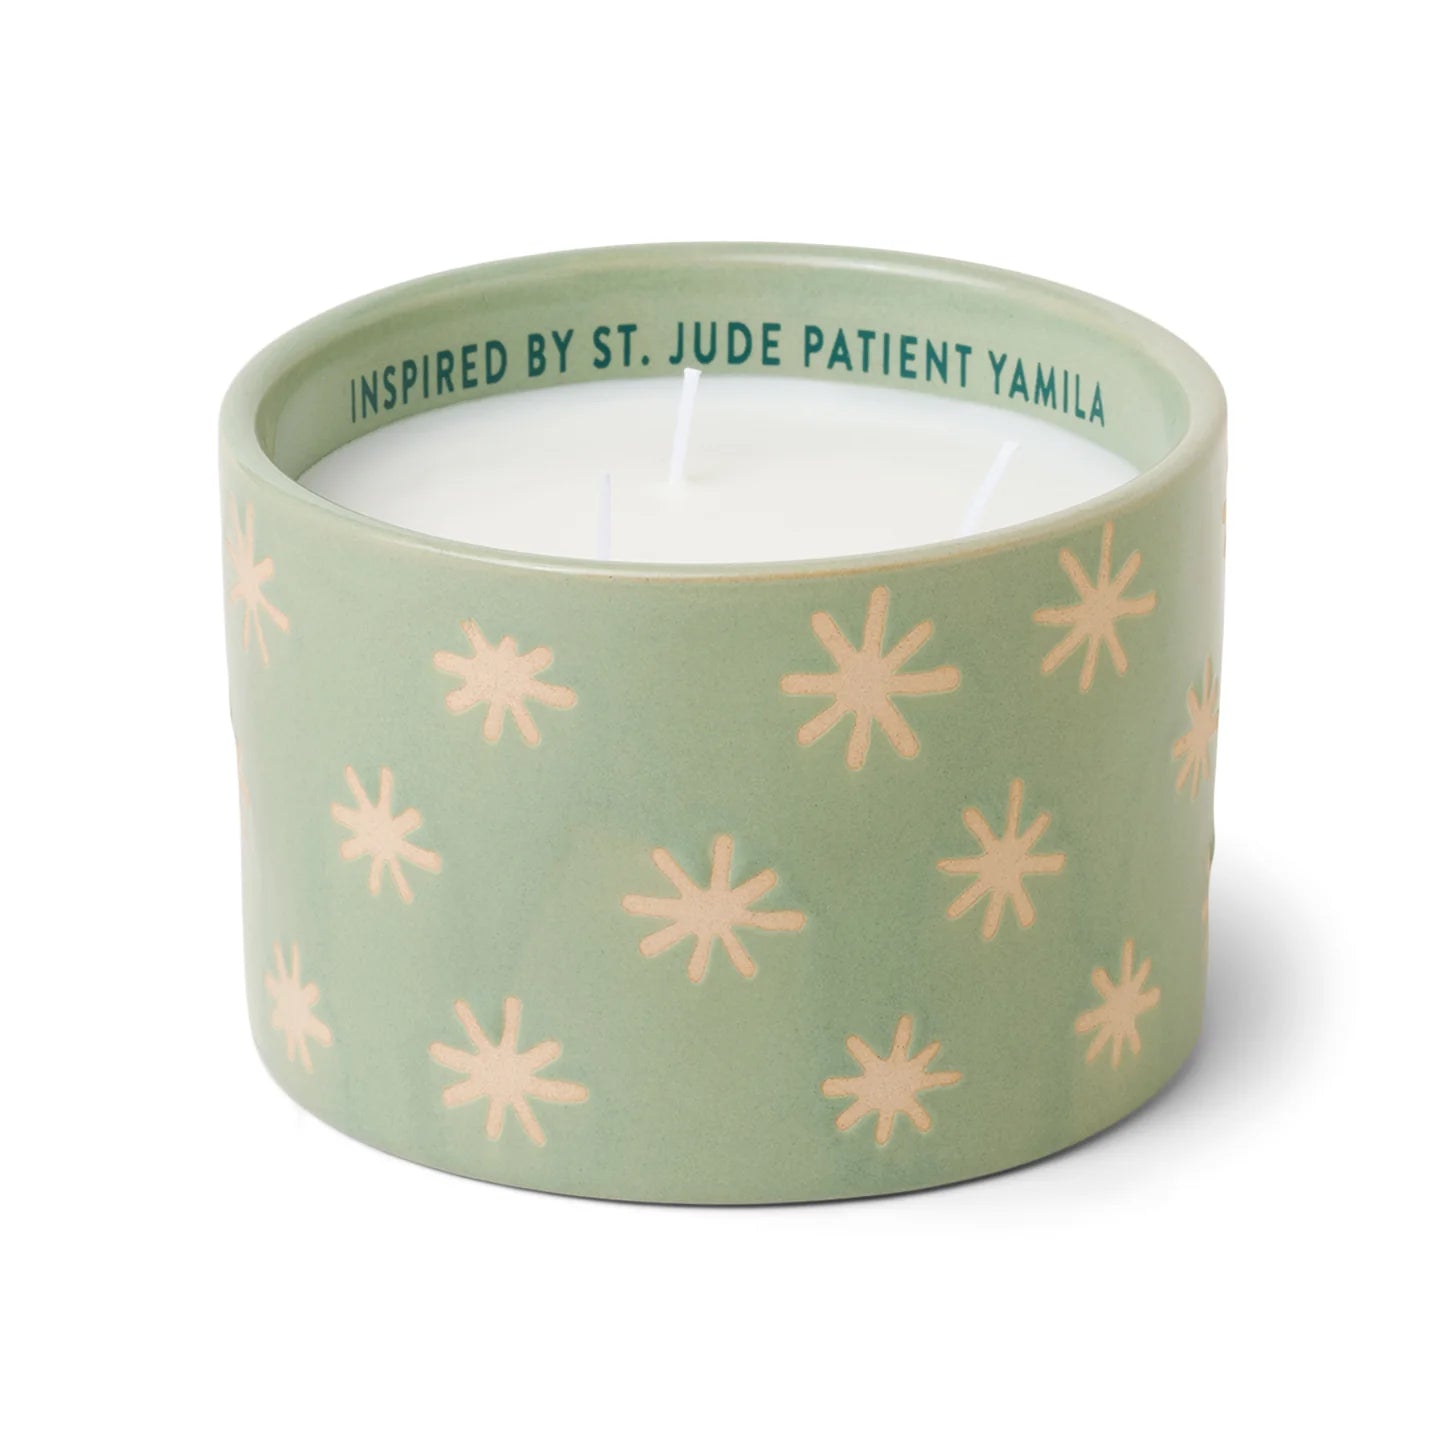 St. Jude Giveback "Inspire" 11 oz. Candle - Mist + Mint